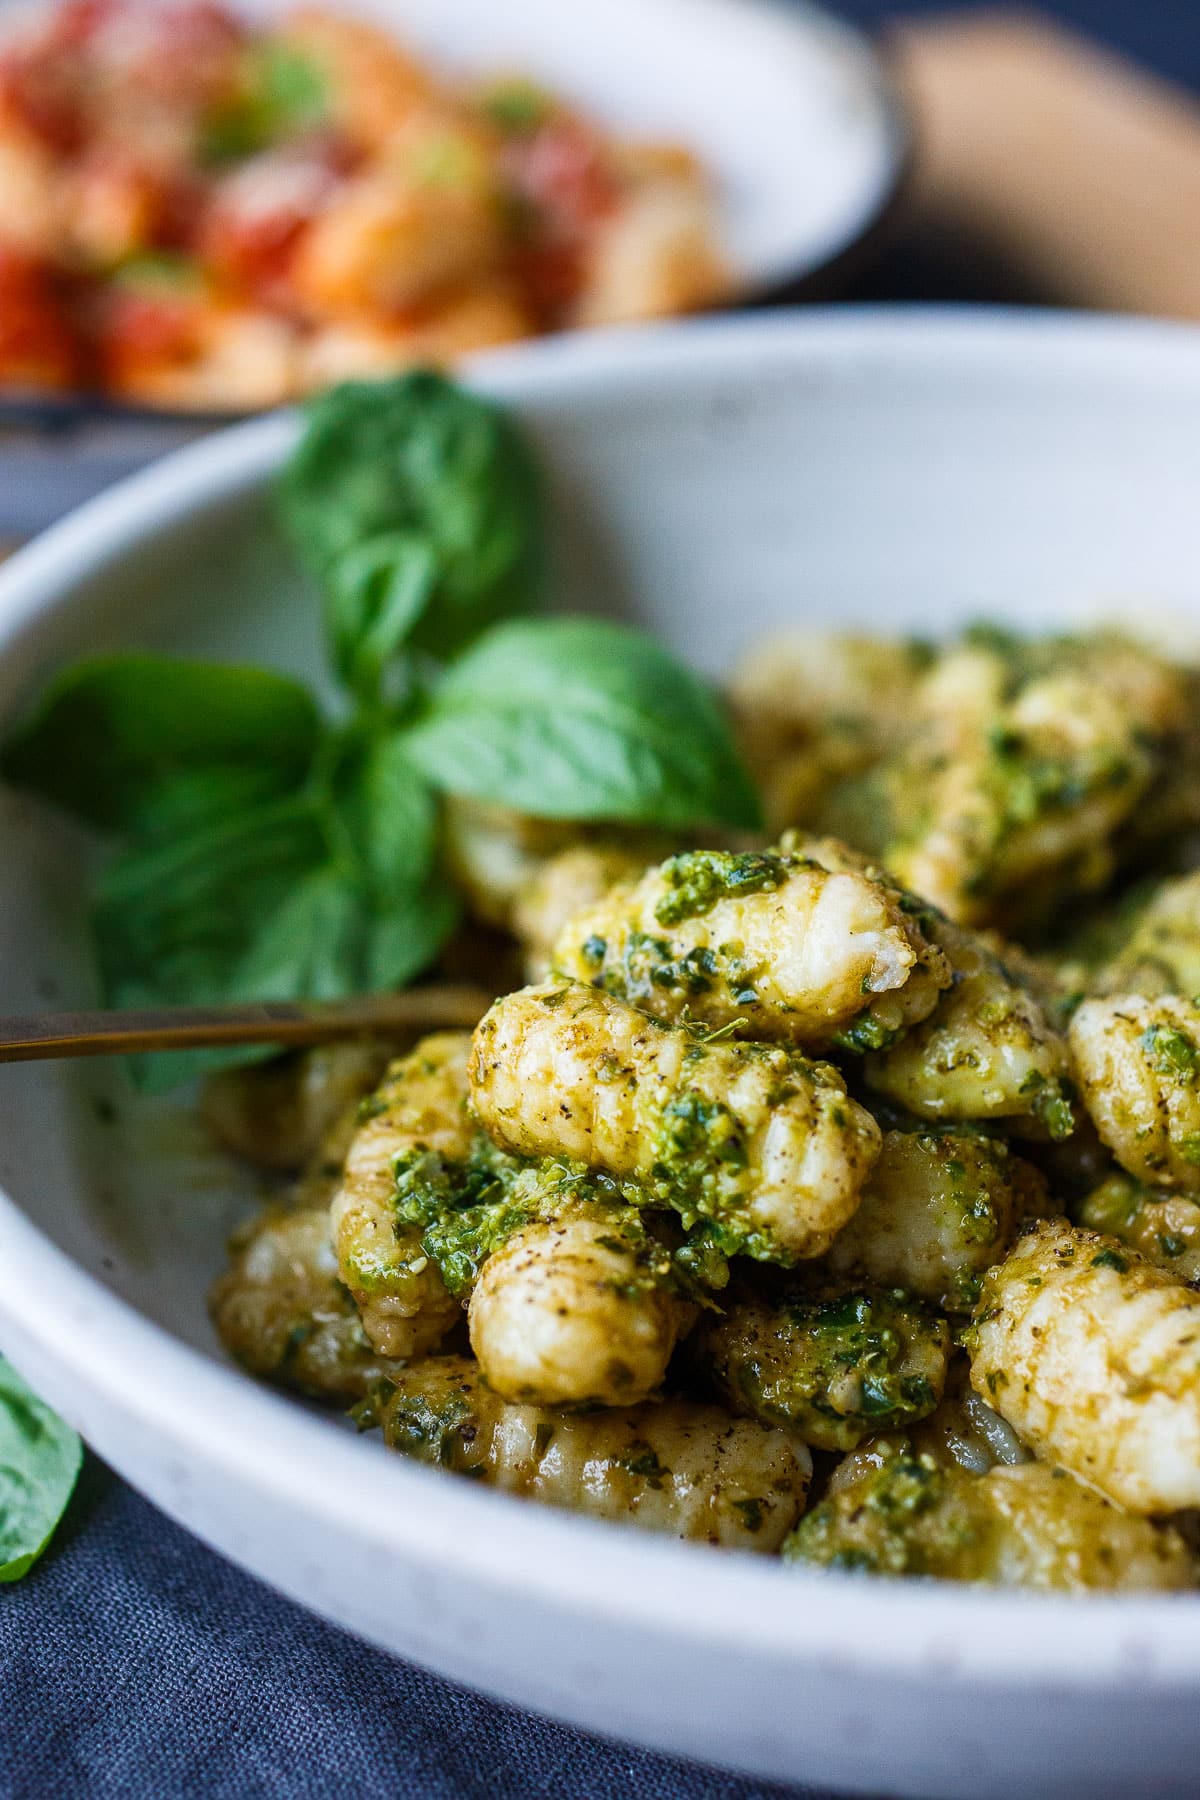 Homemade potato gnocchi! Just four simple ingredients result in the dreamiest little dumplings.  These little pillows of joy are easy to make and much more delicious than store-bought. From baked and sautéed to boiled you'll find so many ways to use them! 